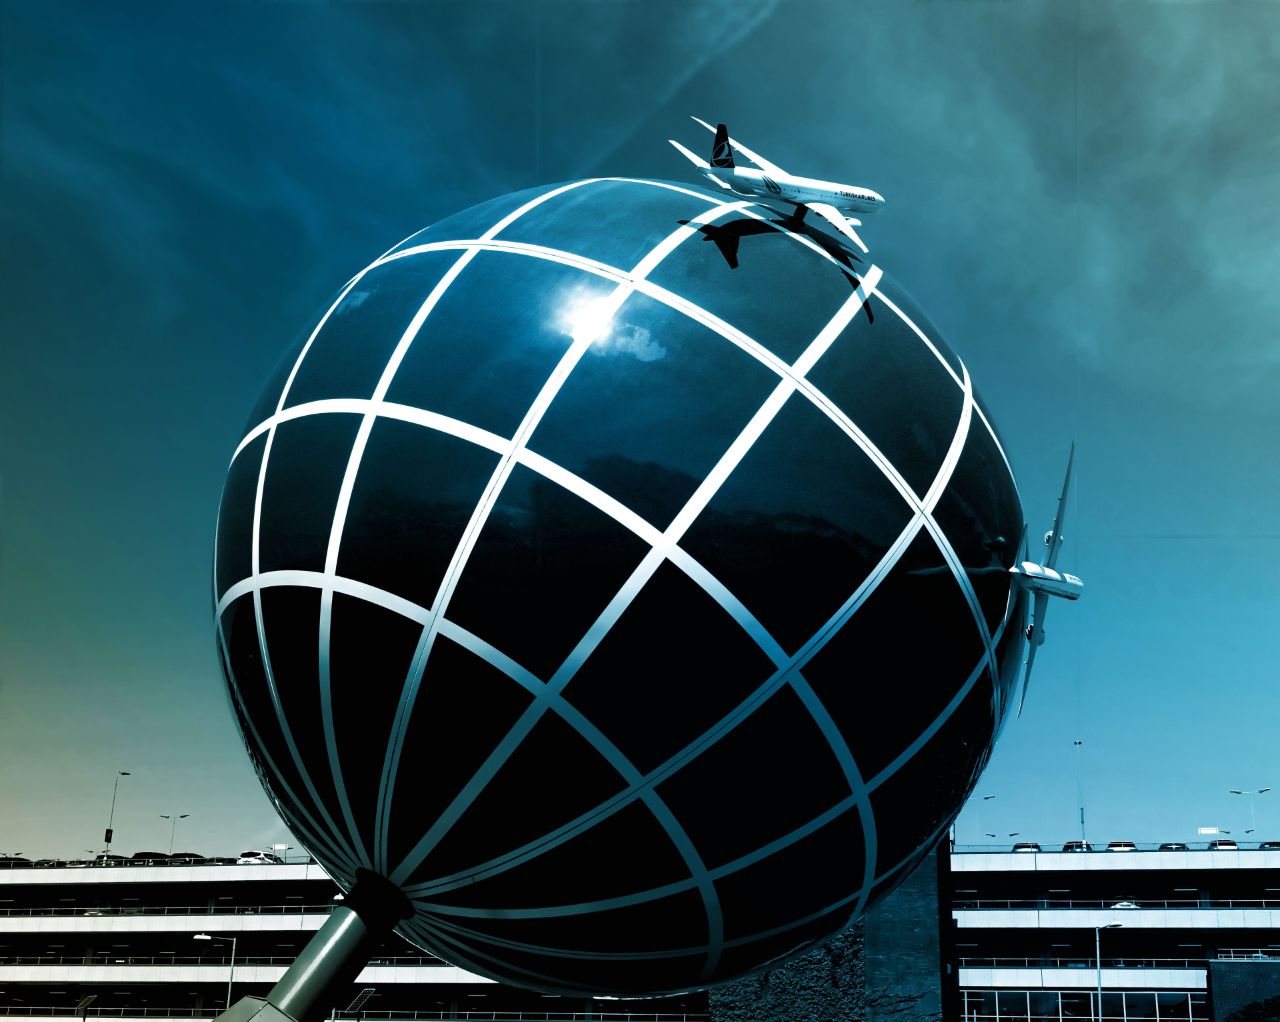 Image of a globe depicting a holistic business approach